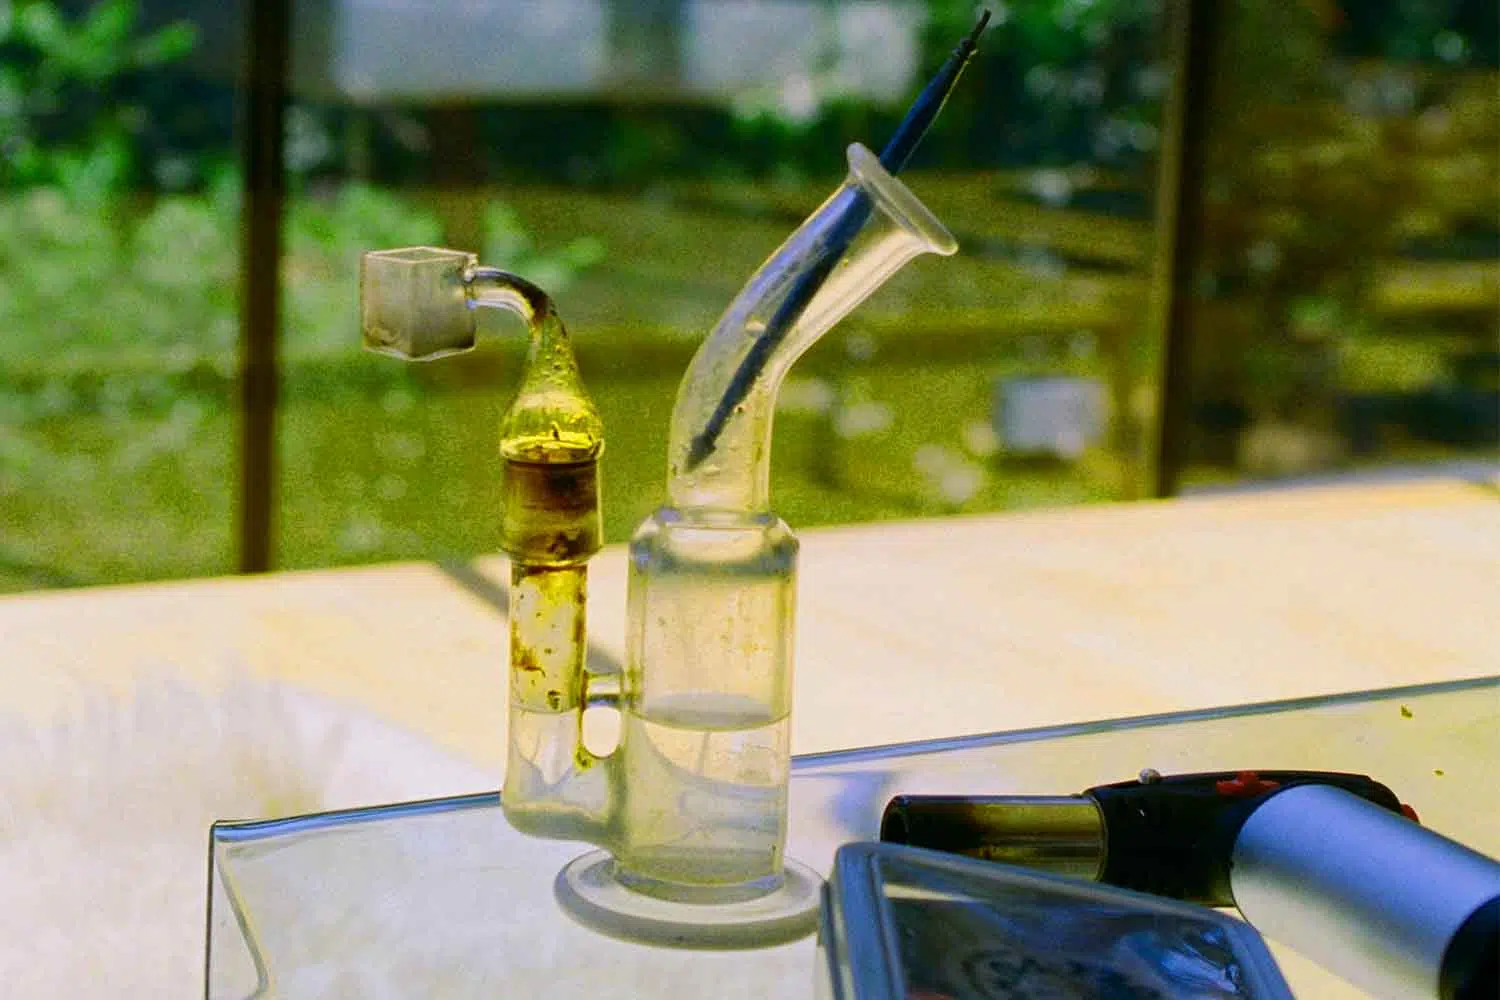 how to clean dab rig